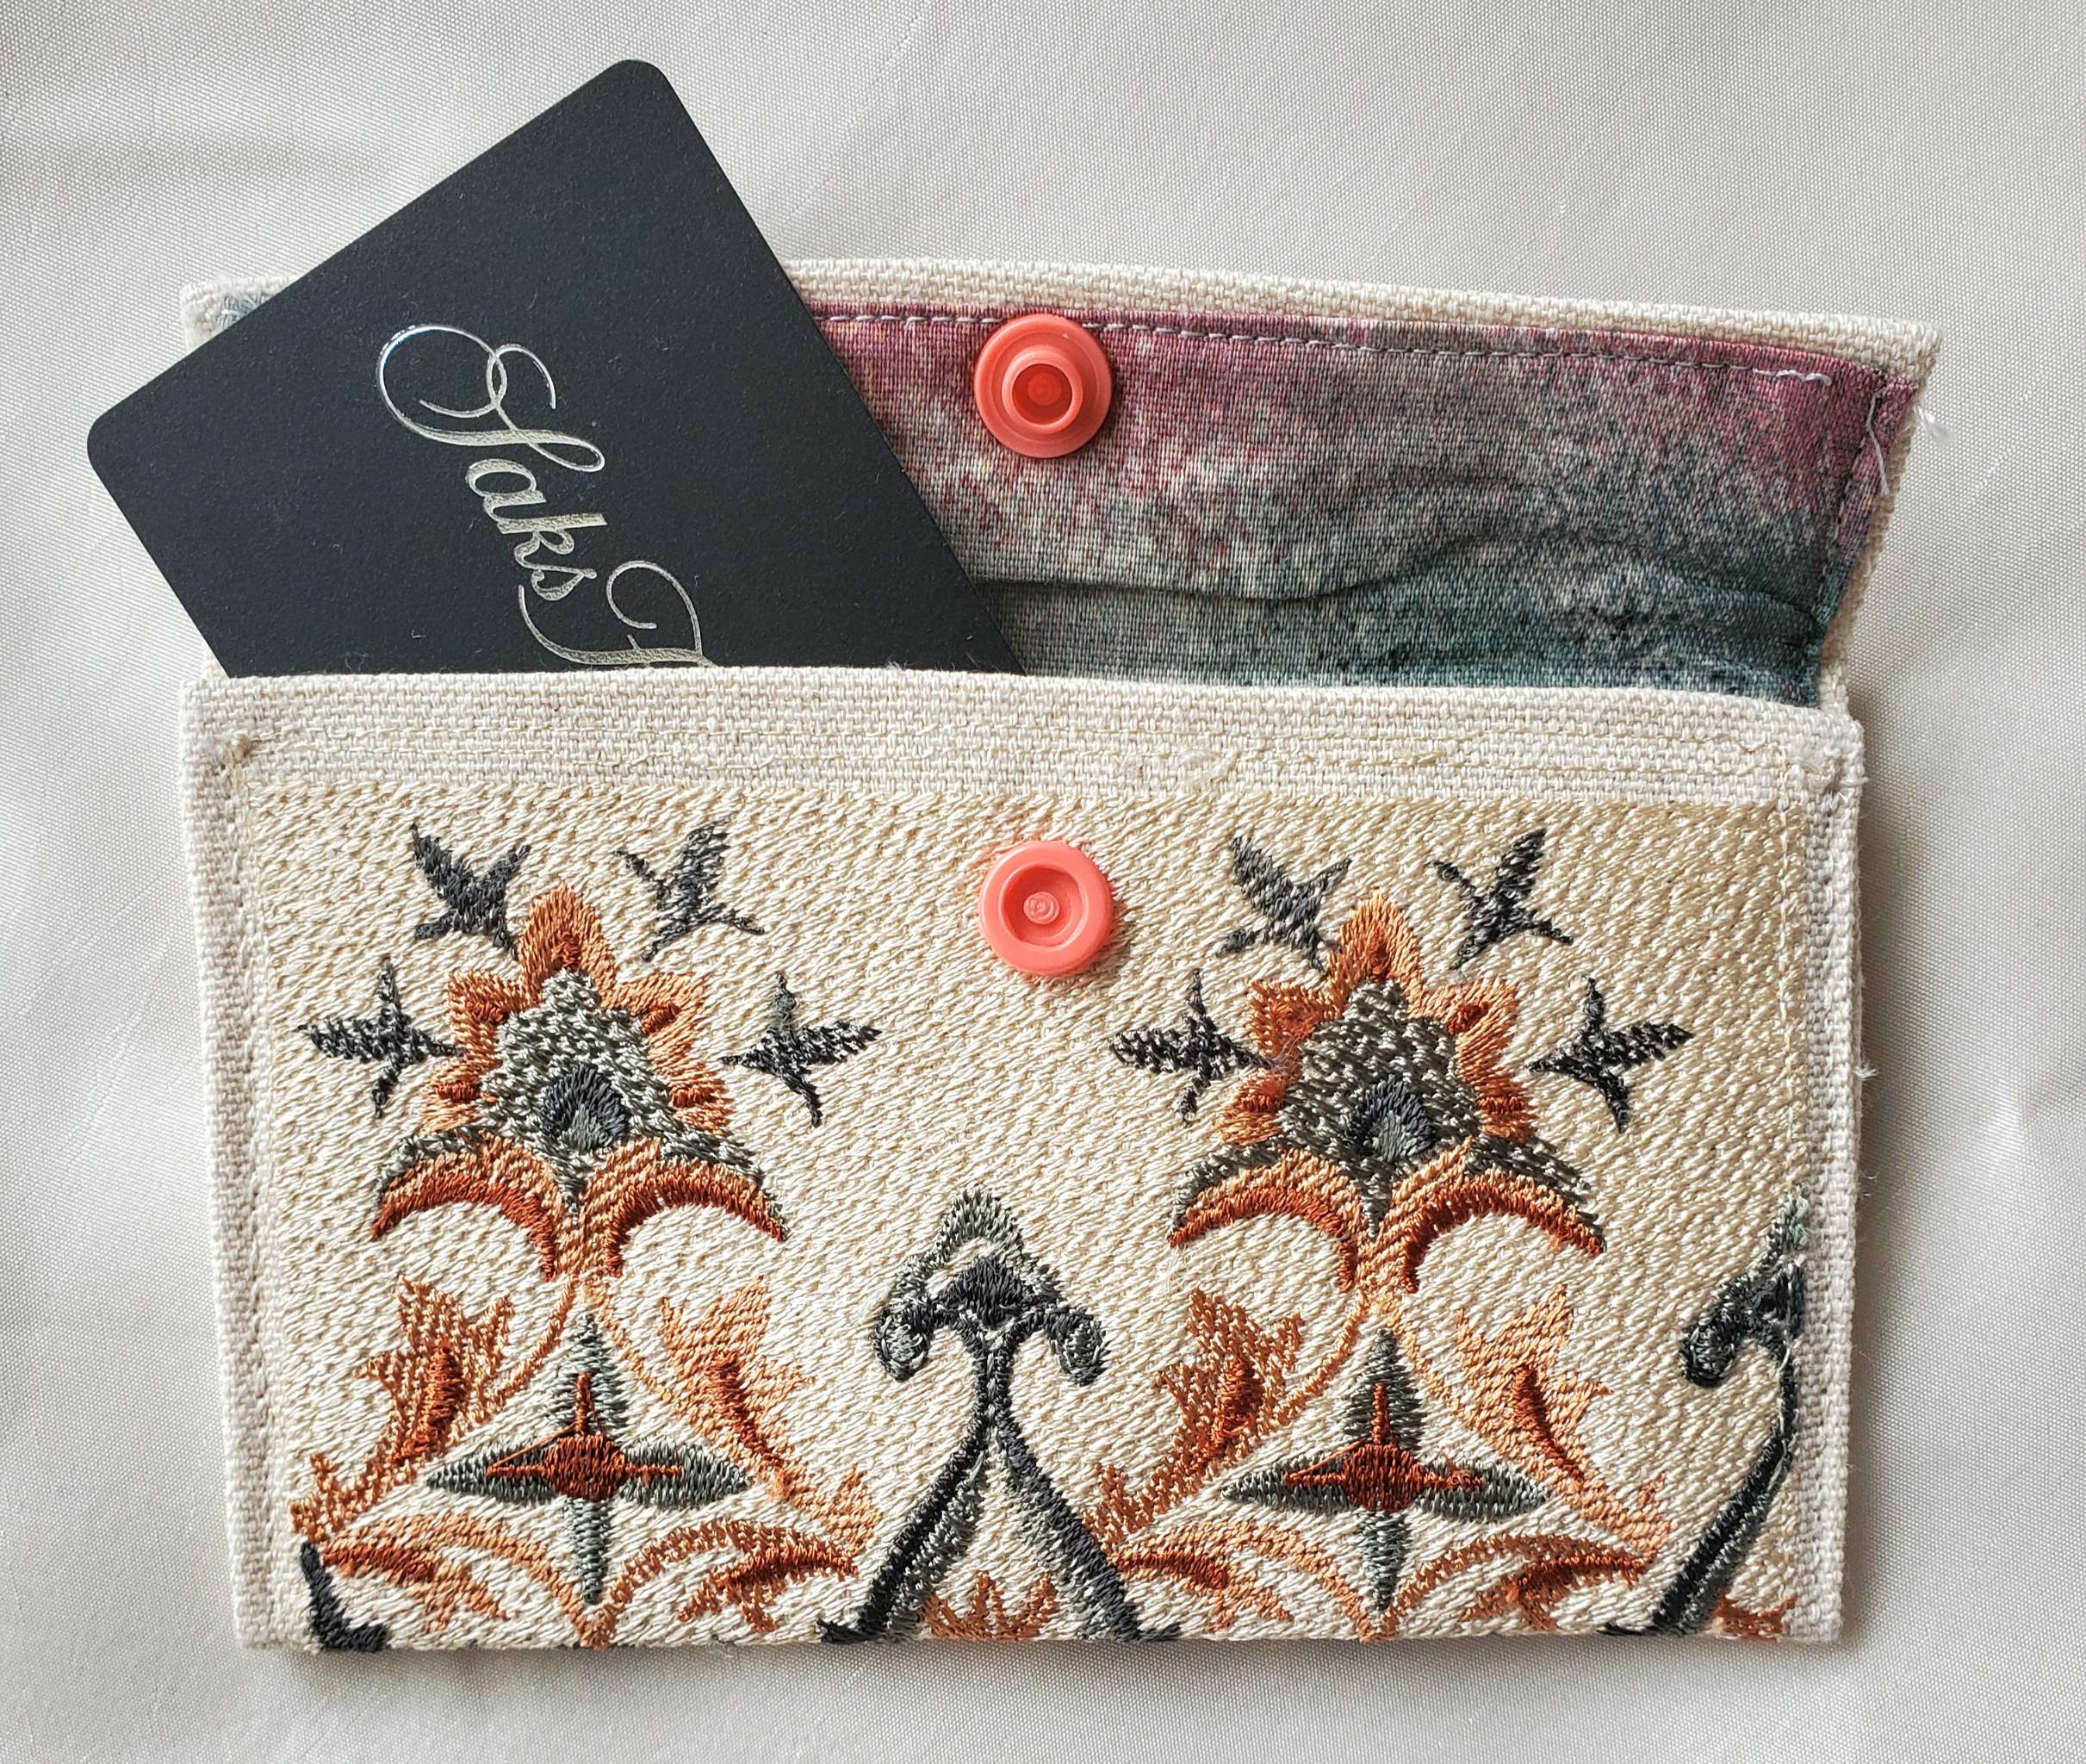 small-tapestry-peach-sage-wallet-open-Jen's-Bag-embroidered-bag